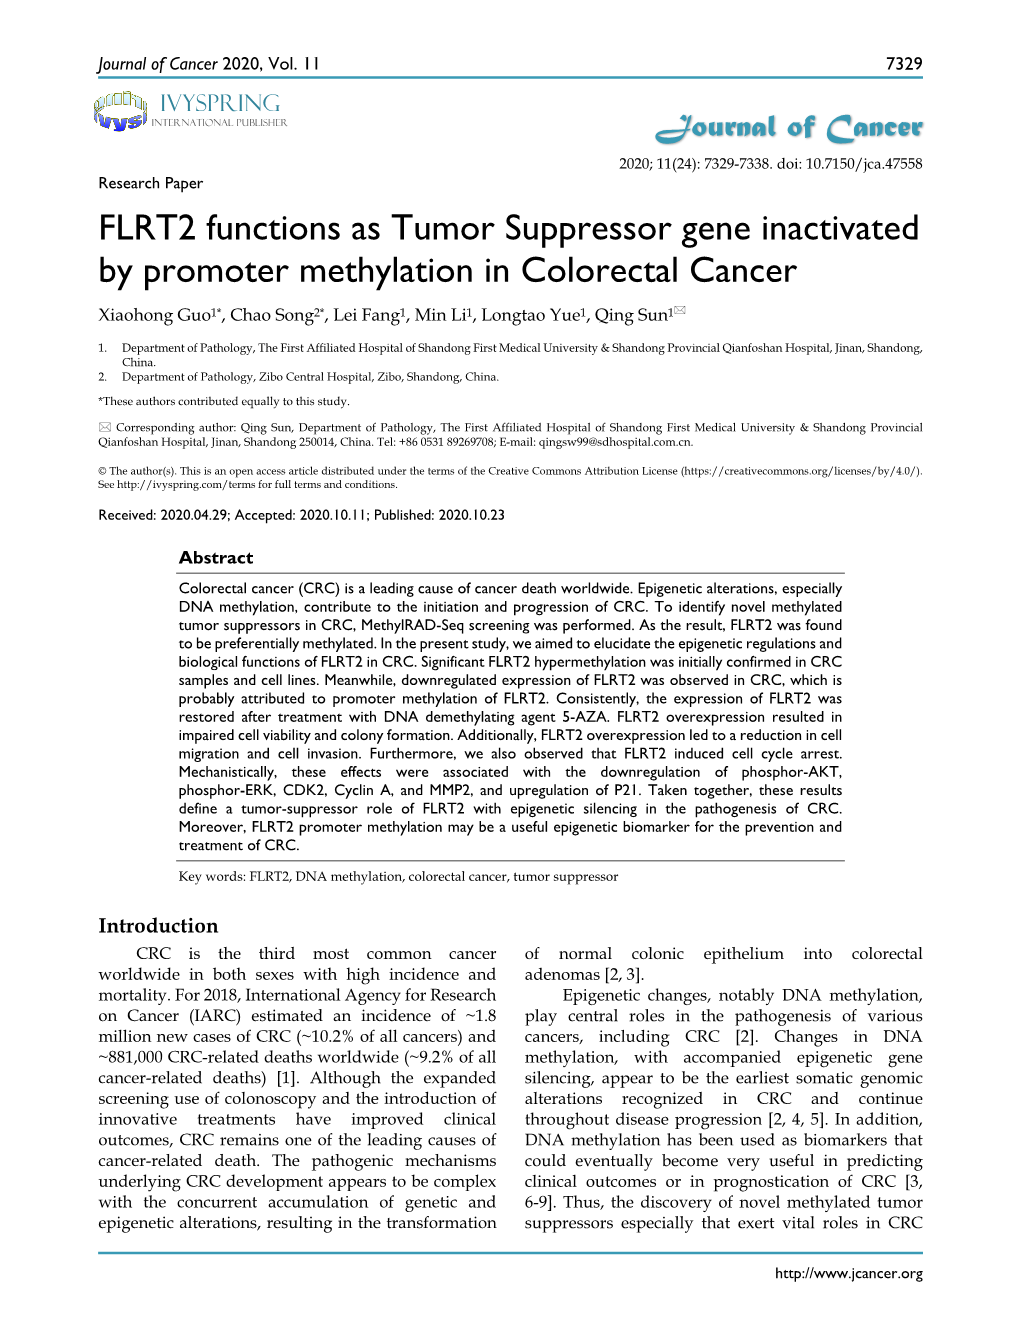 FLRT2 Functions As Tumor Suppressor Gene Inactivated by Promoter